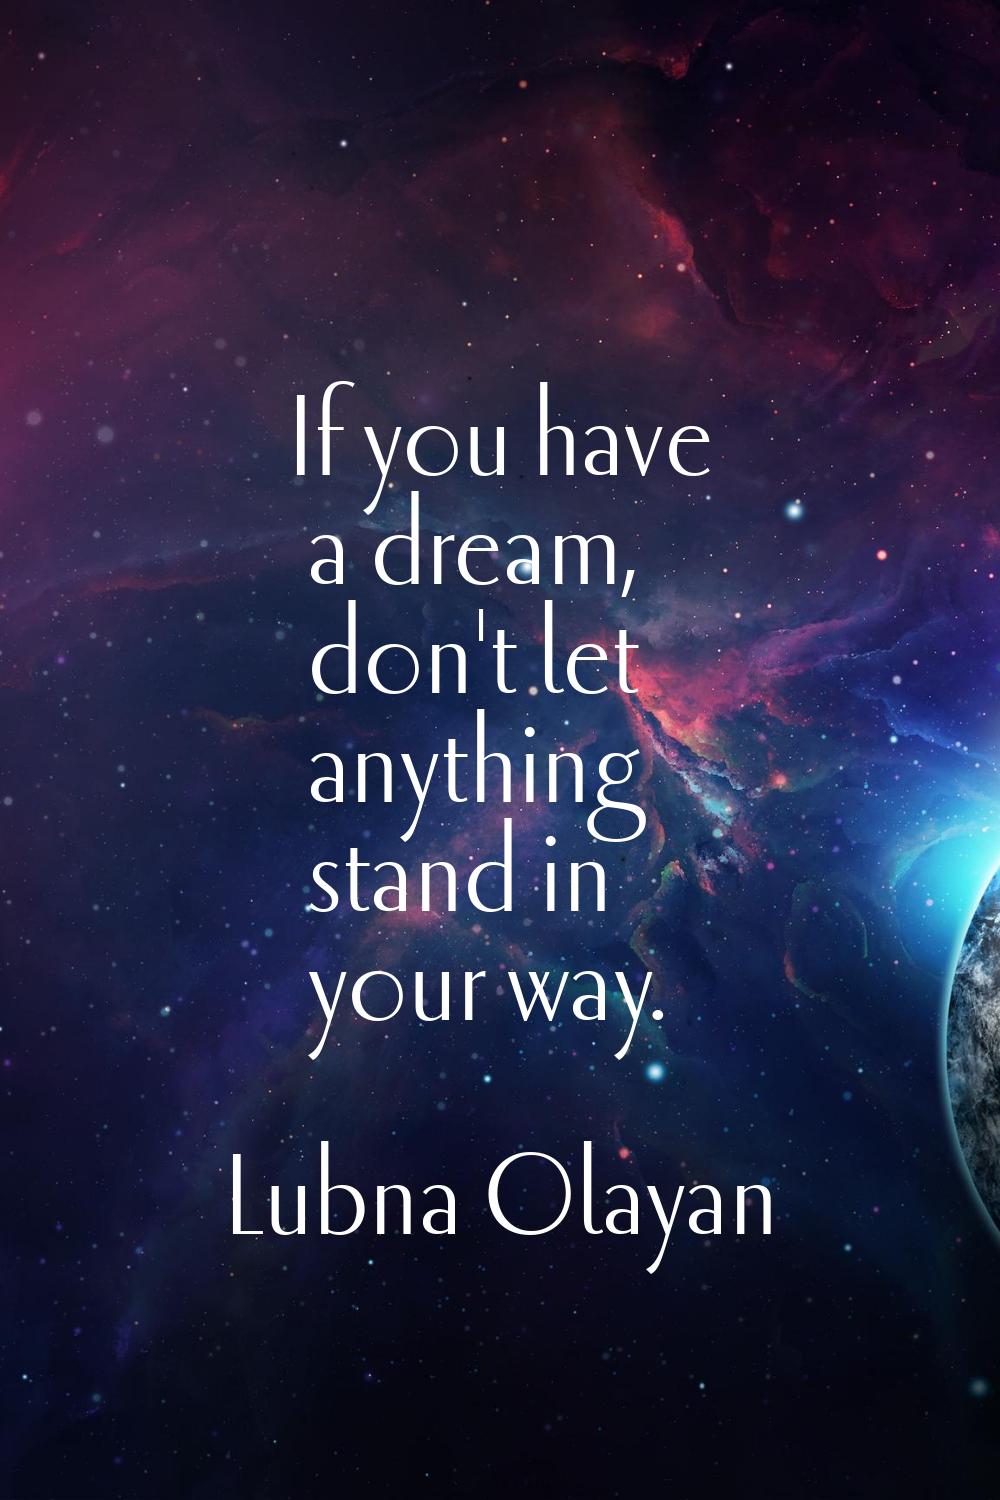 If you have a dream, don't let anything stand in your way.